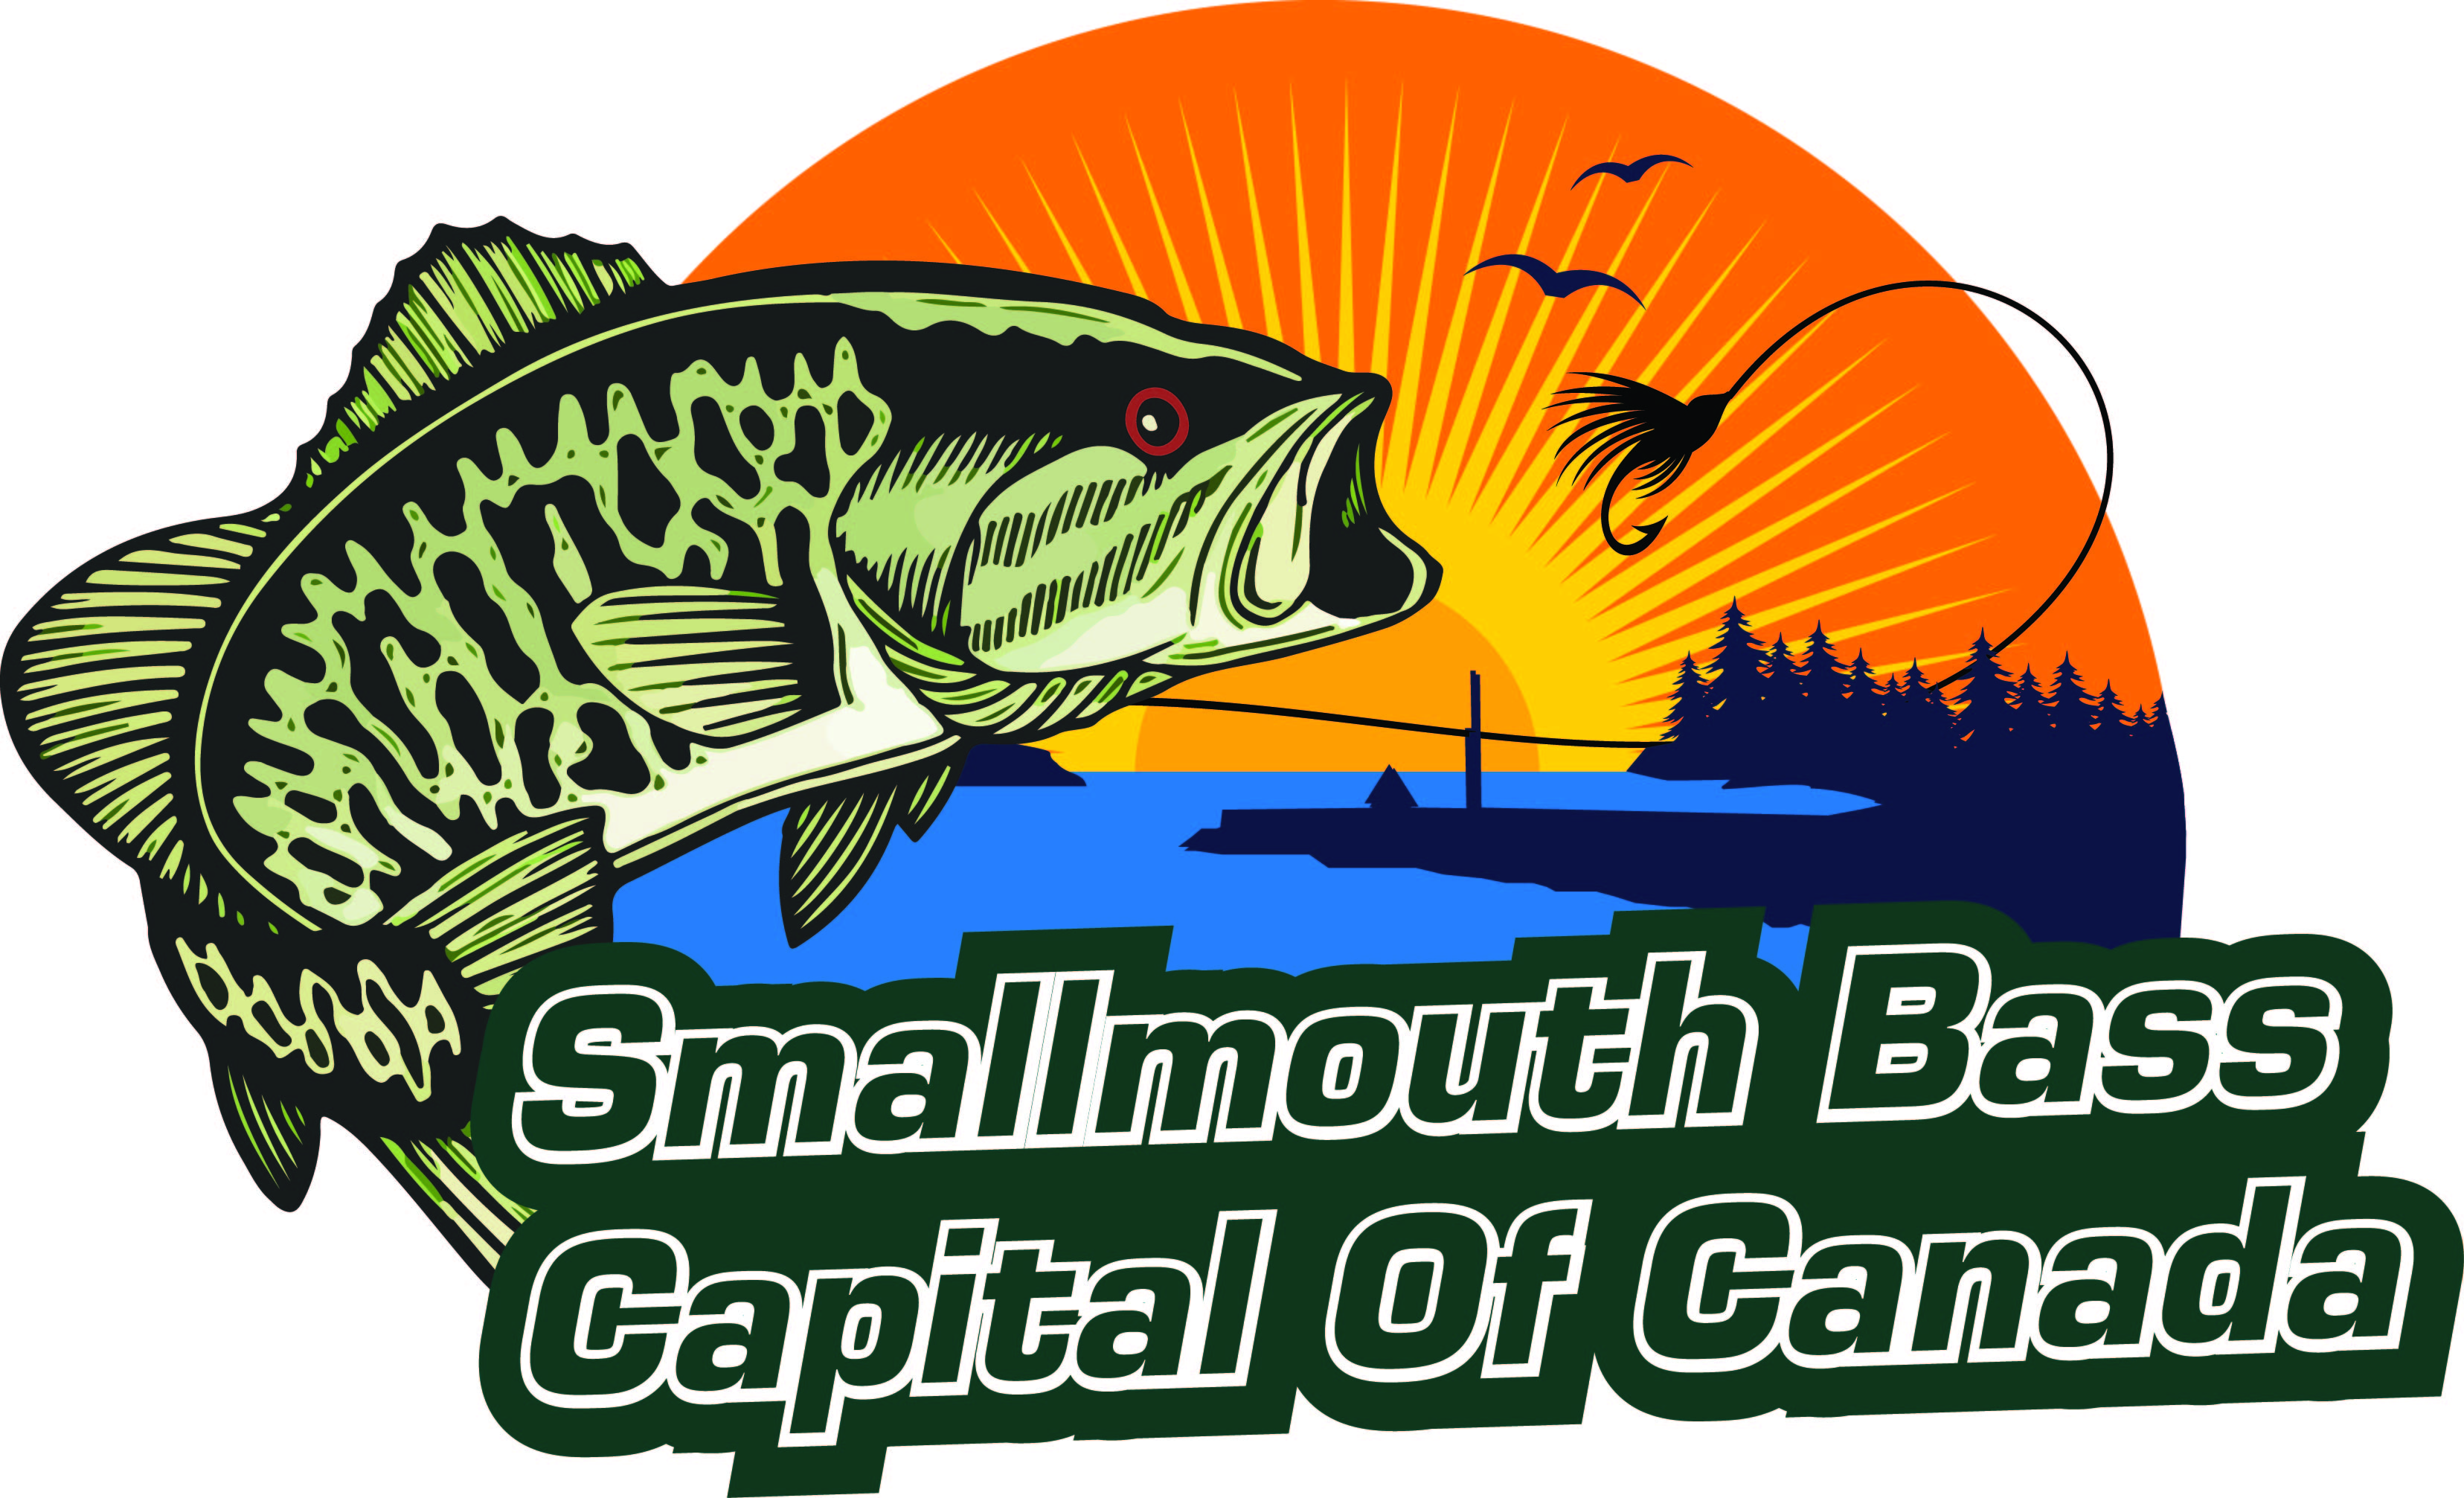 smallmouth bass fishing capital of canada logo, bass fish trying to catch a lure